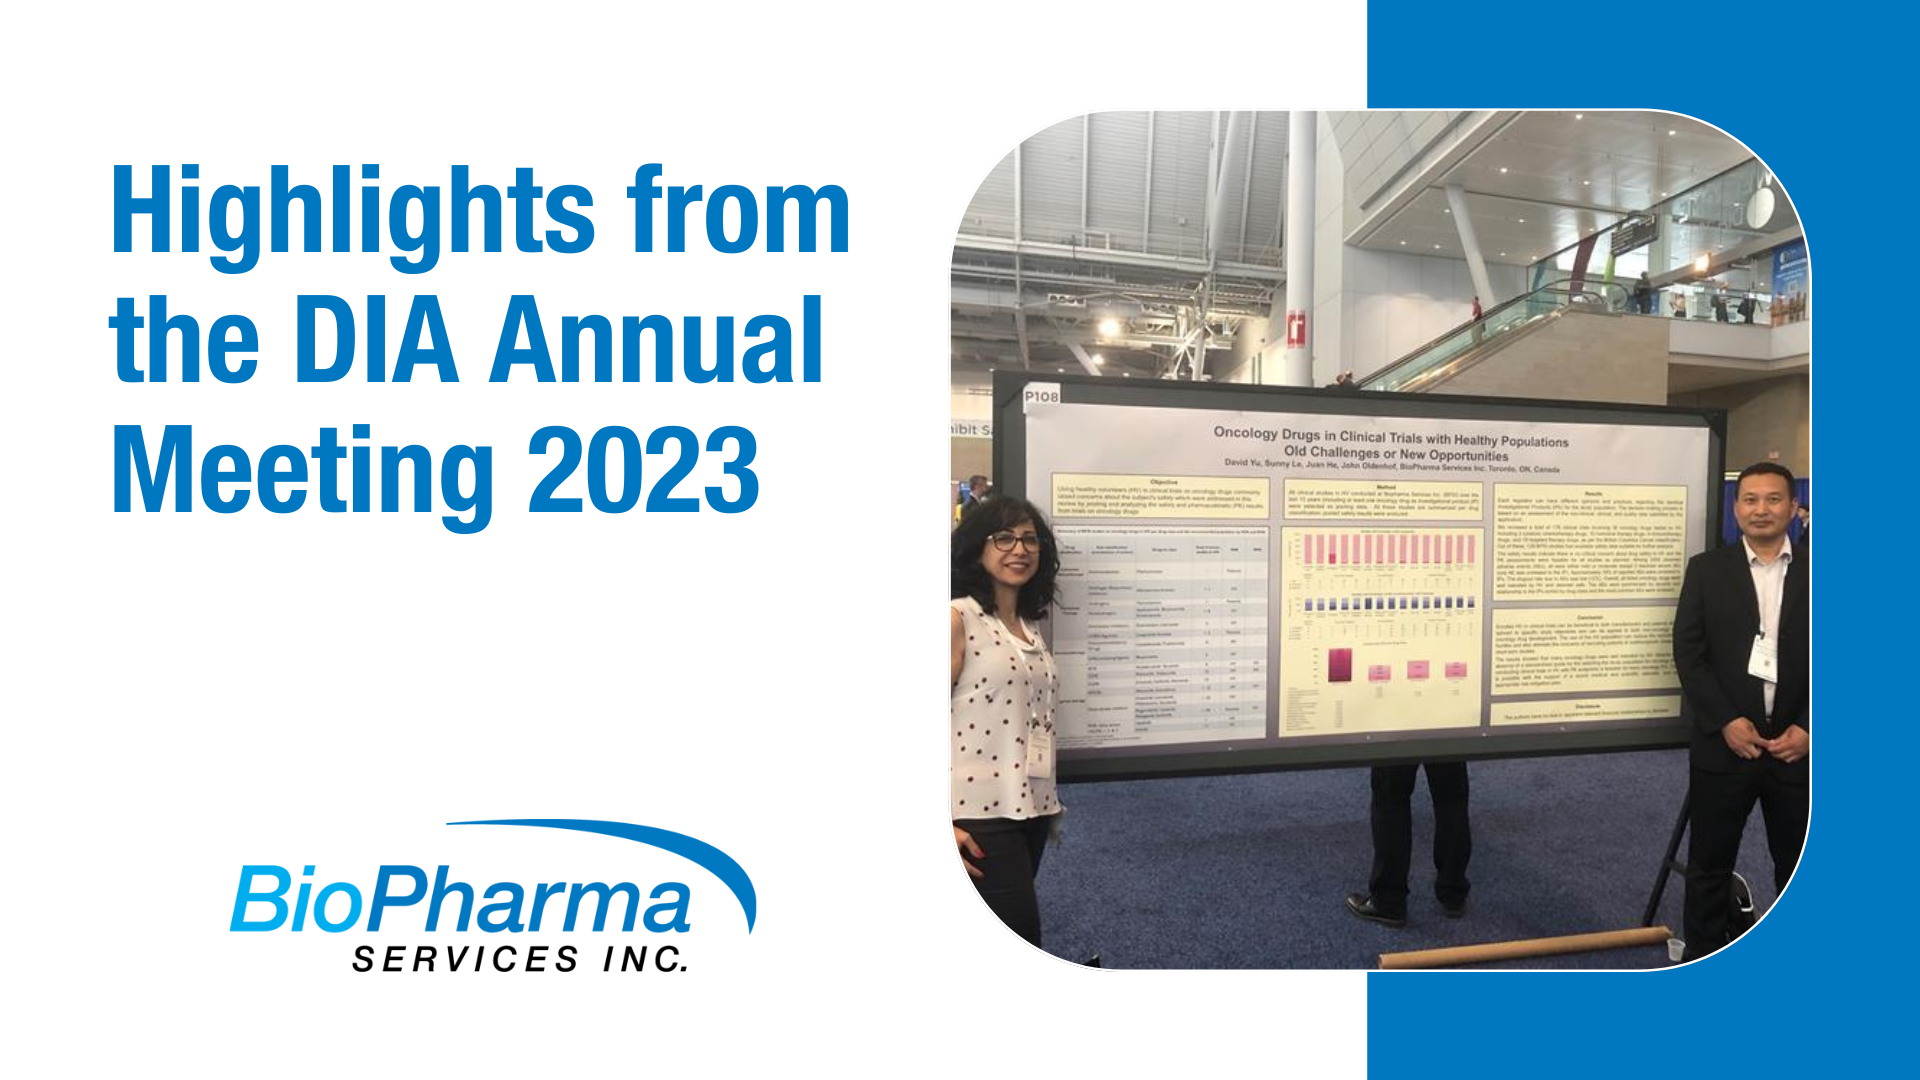 BioPharma Services Highlights from the DIA Annual Meeting blog image.